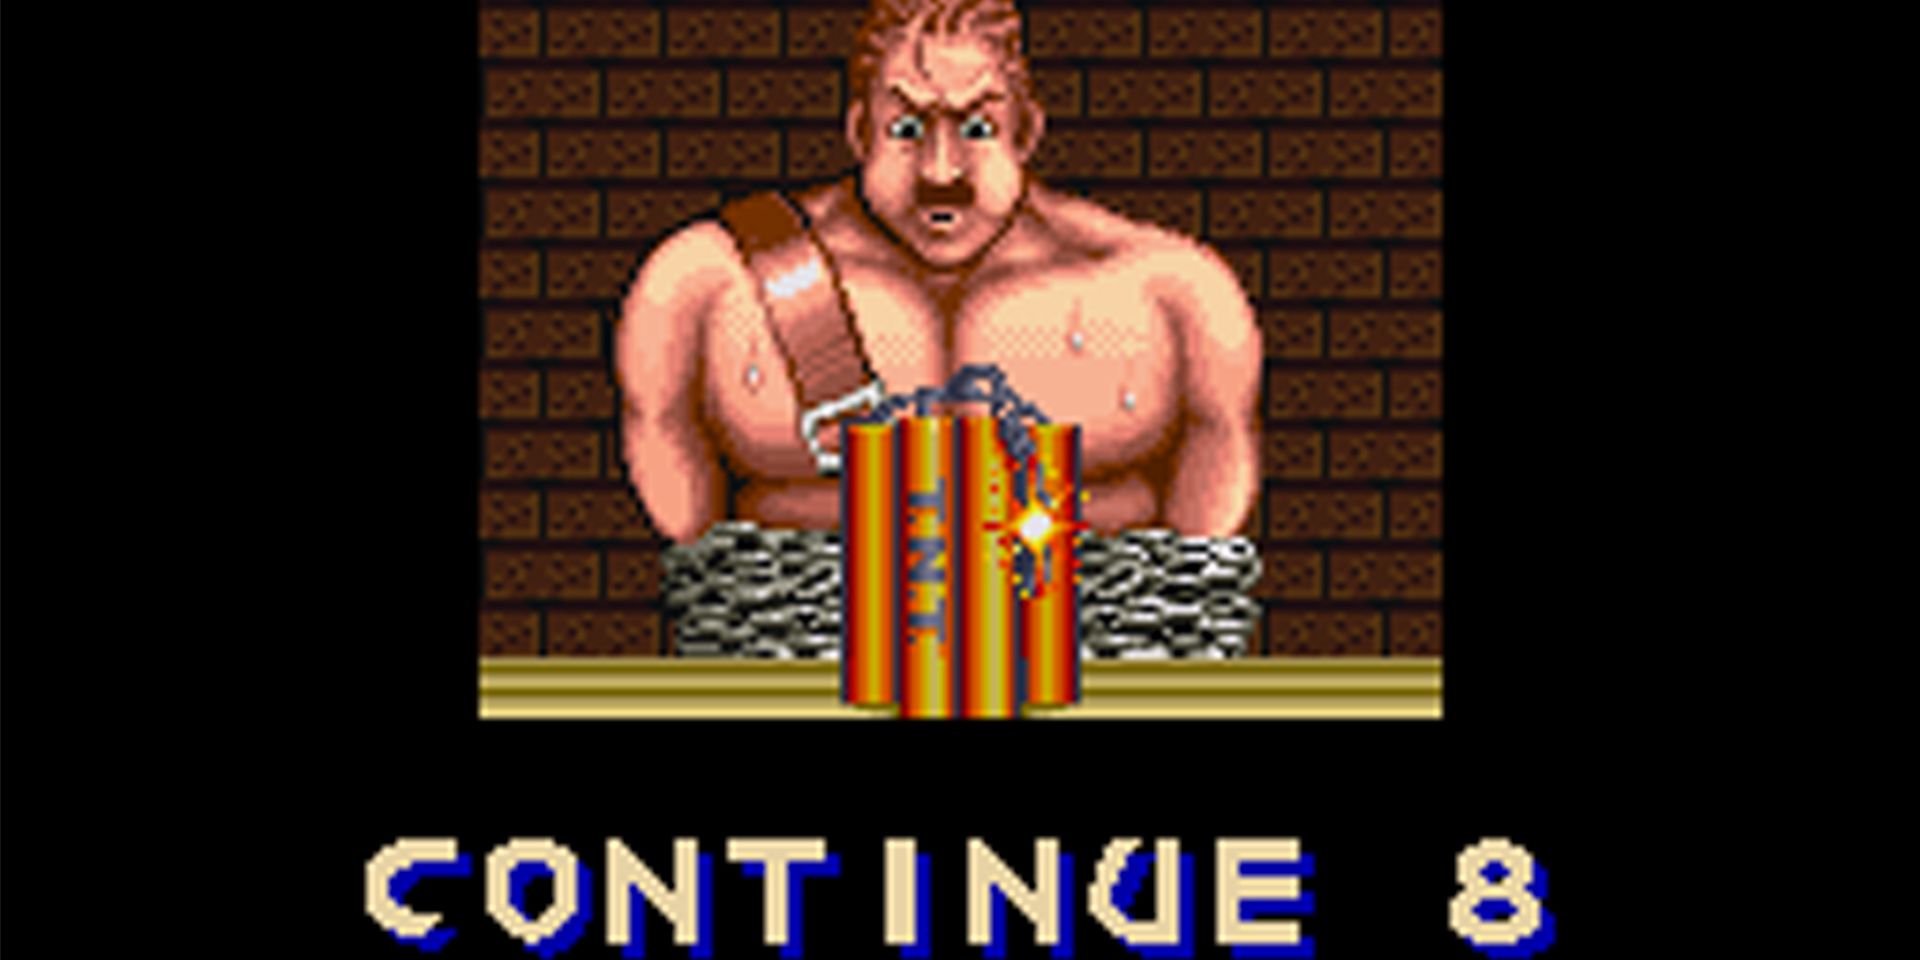 Mike Haggar tries to blow out the fuse in the dynamite.